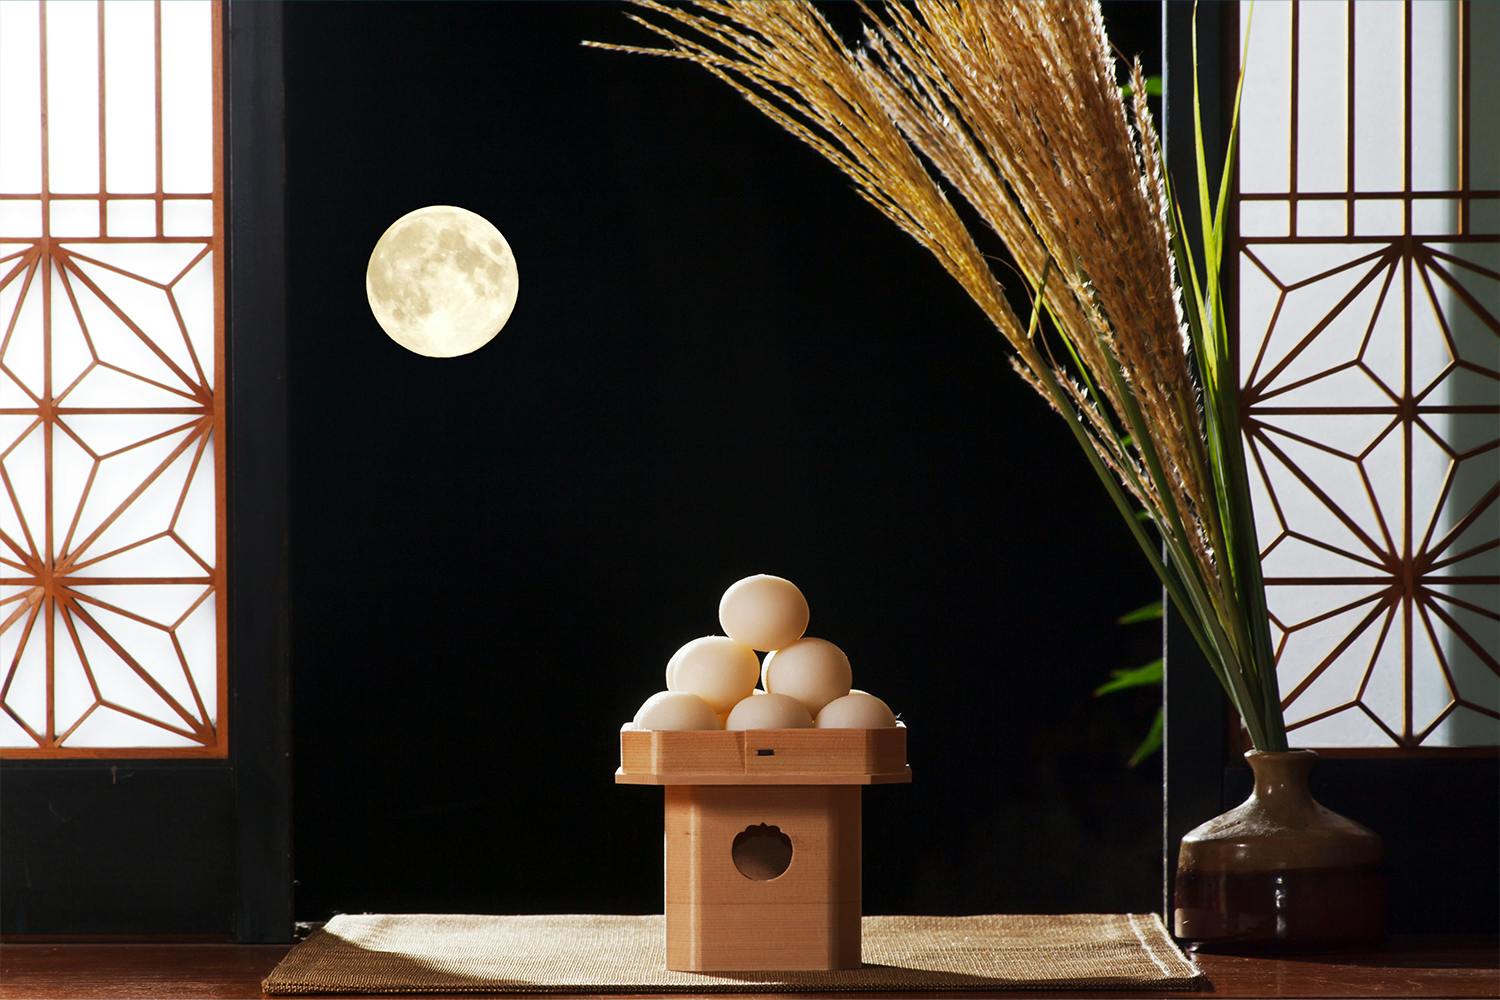 A porch of an old Japanese house is pictured, with Tsukimi elements in the background including: Tsukimi dango, susuki pampas grass, and a glowing harvest moon between two Japanese traditional shoji doors.